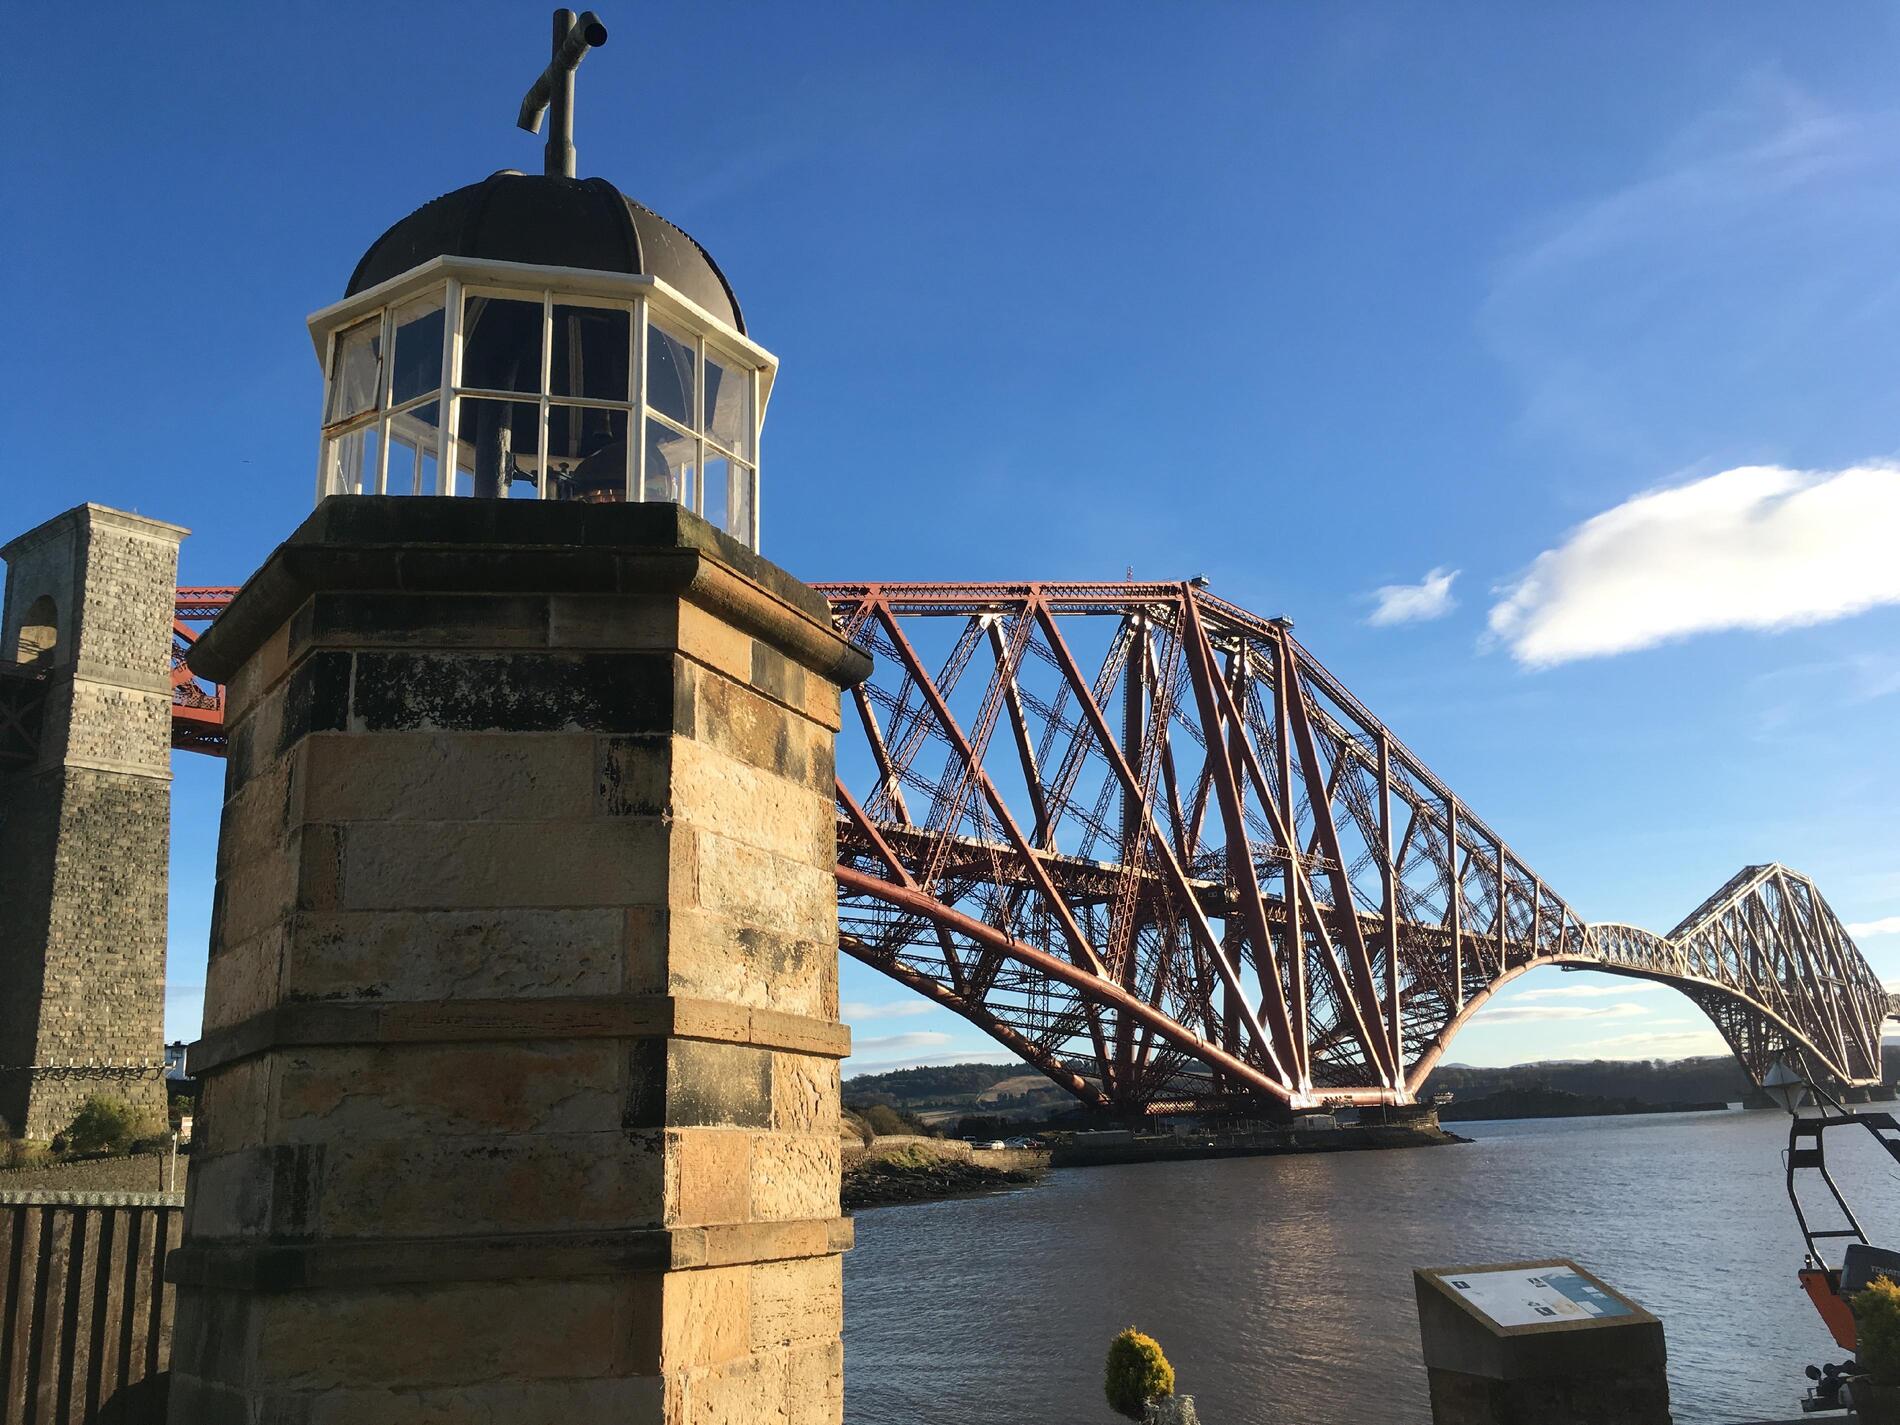 The lighthouse in the foreground on the left, with the bridge set against a blue sky in the background.